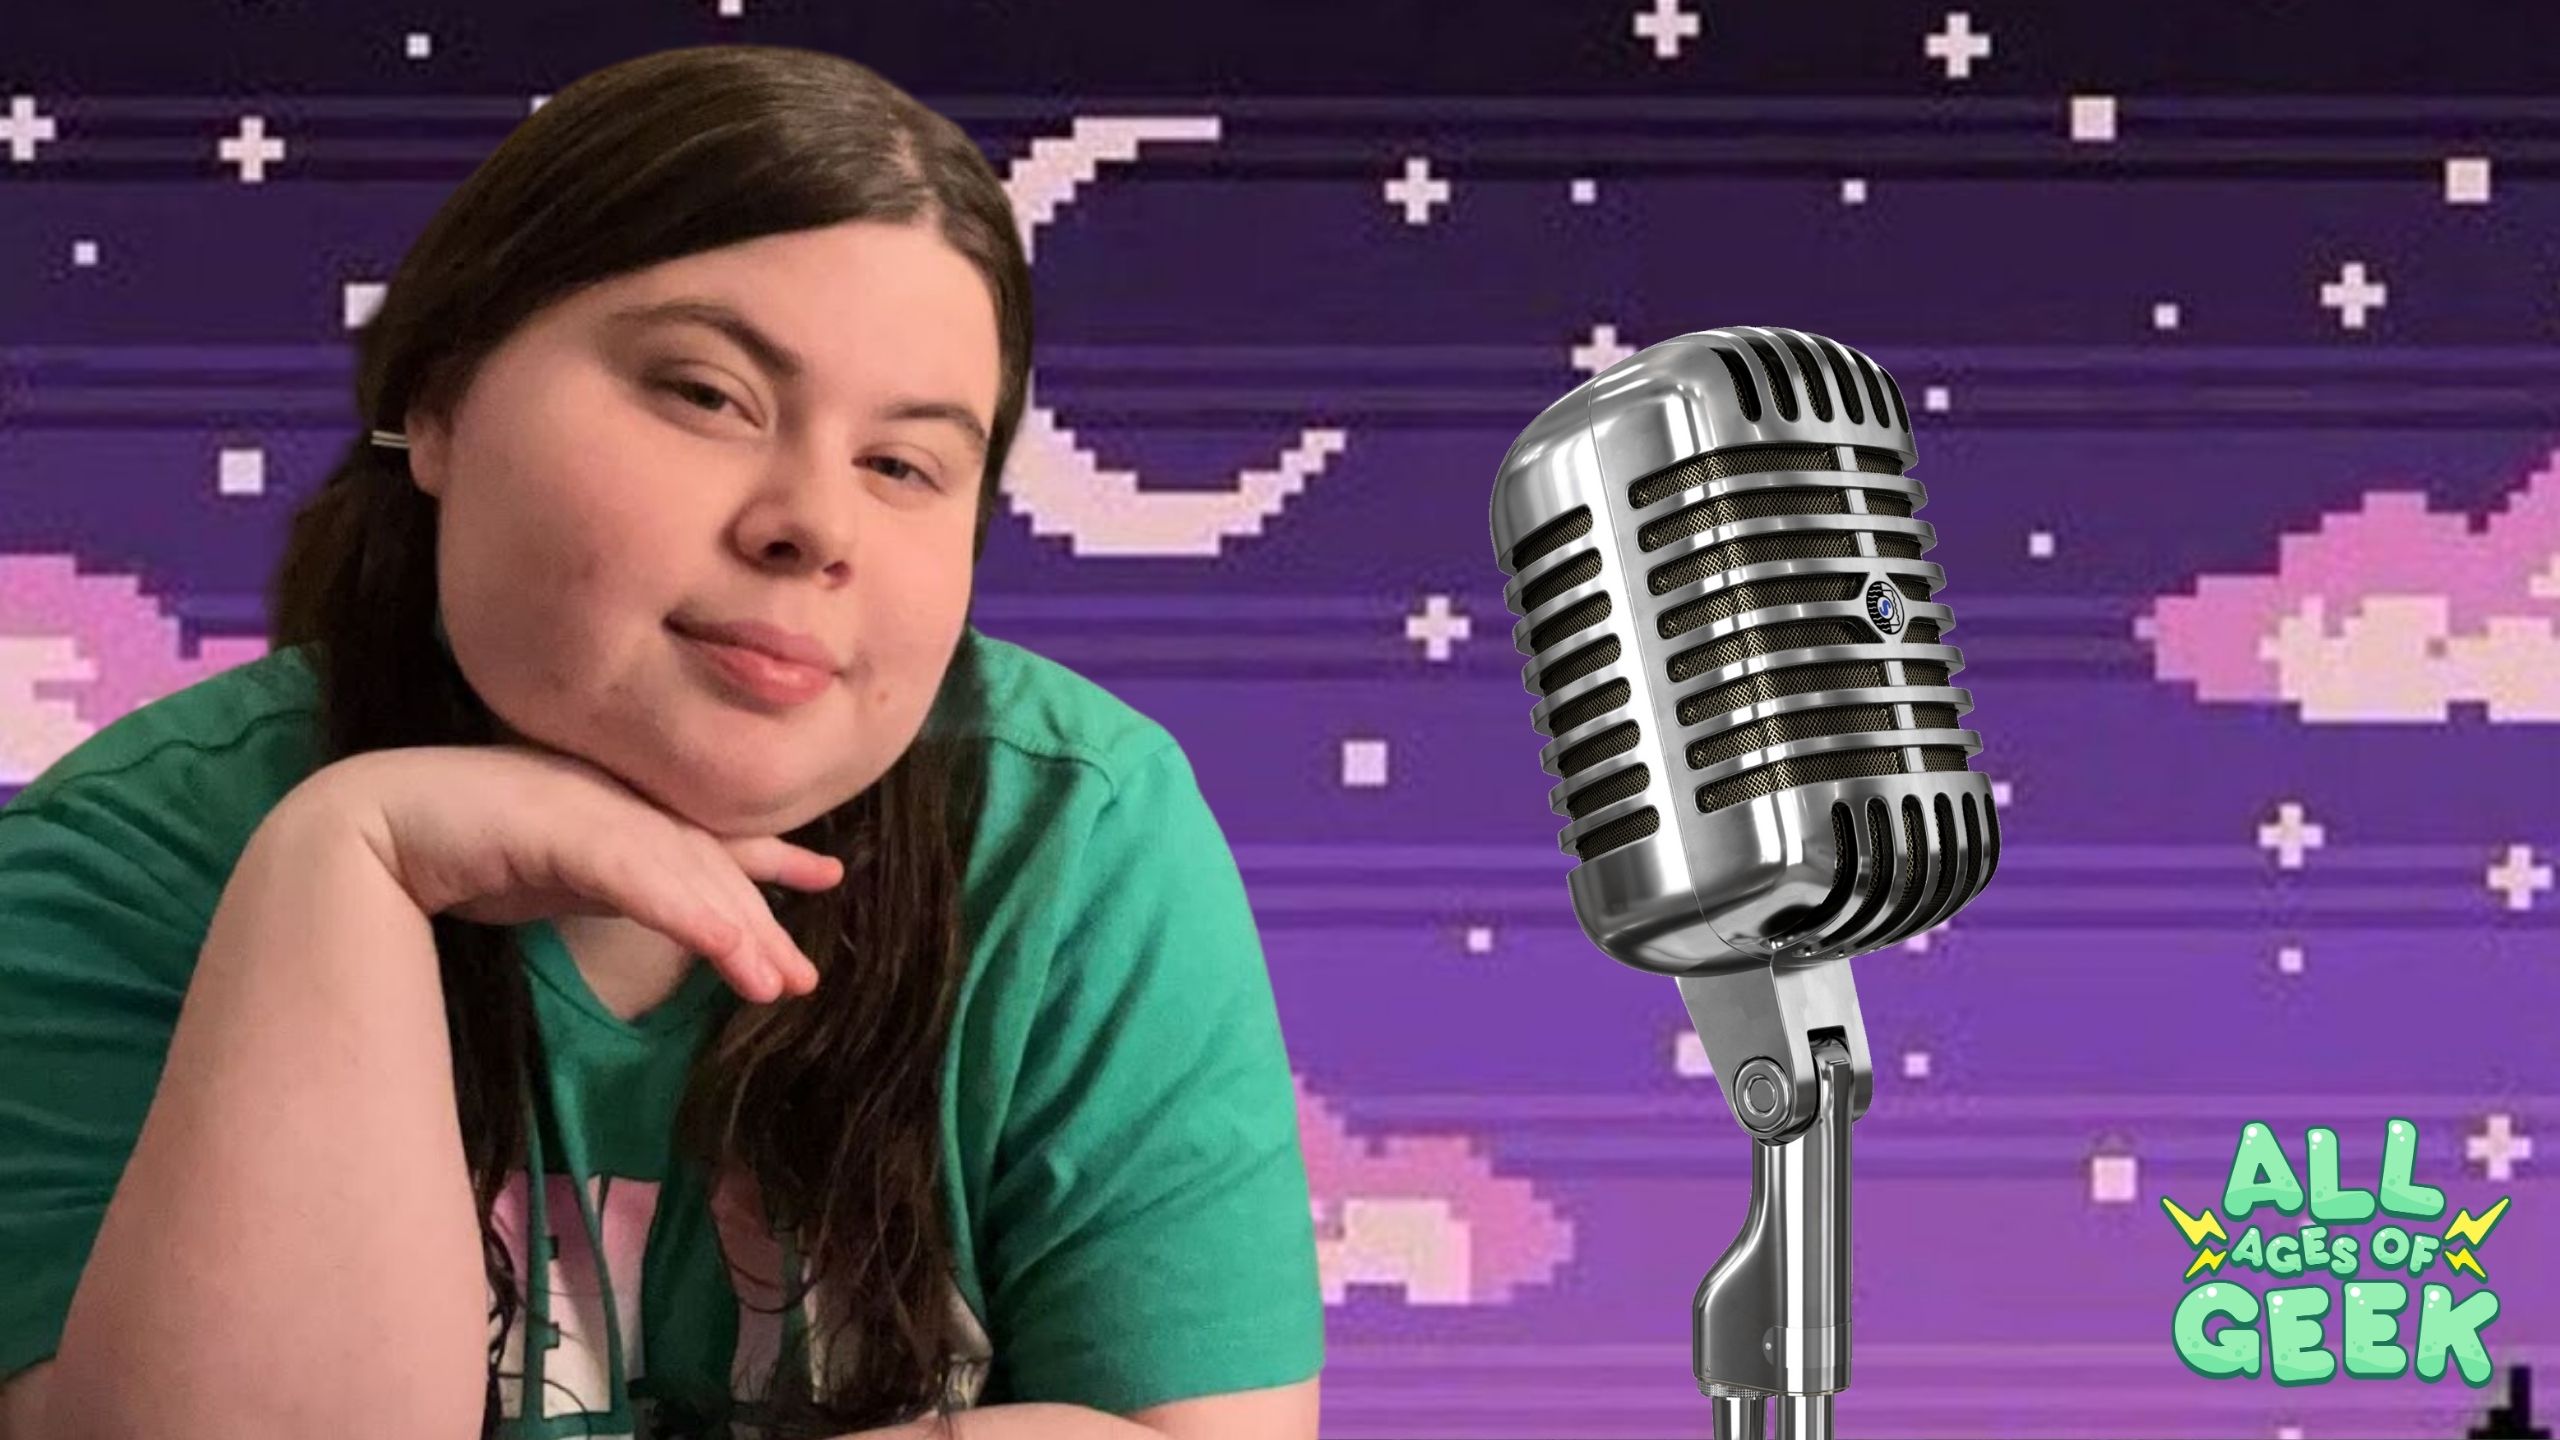 We Interviewed Voice Actor Cara O’Connor!